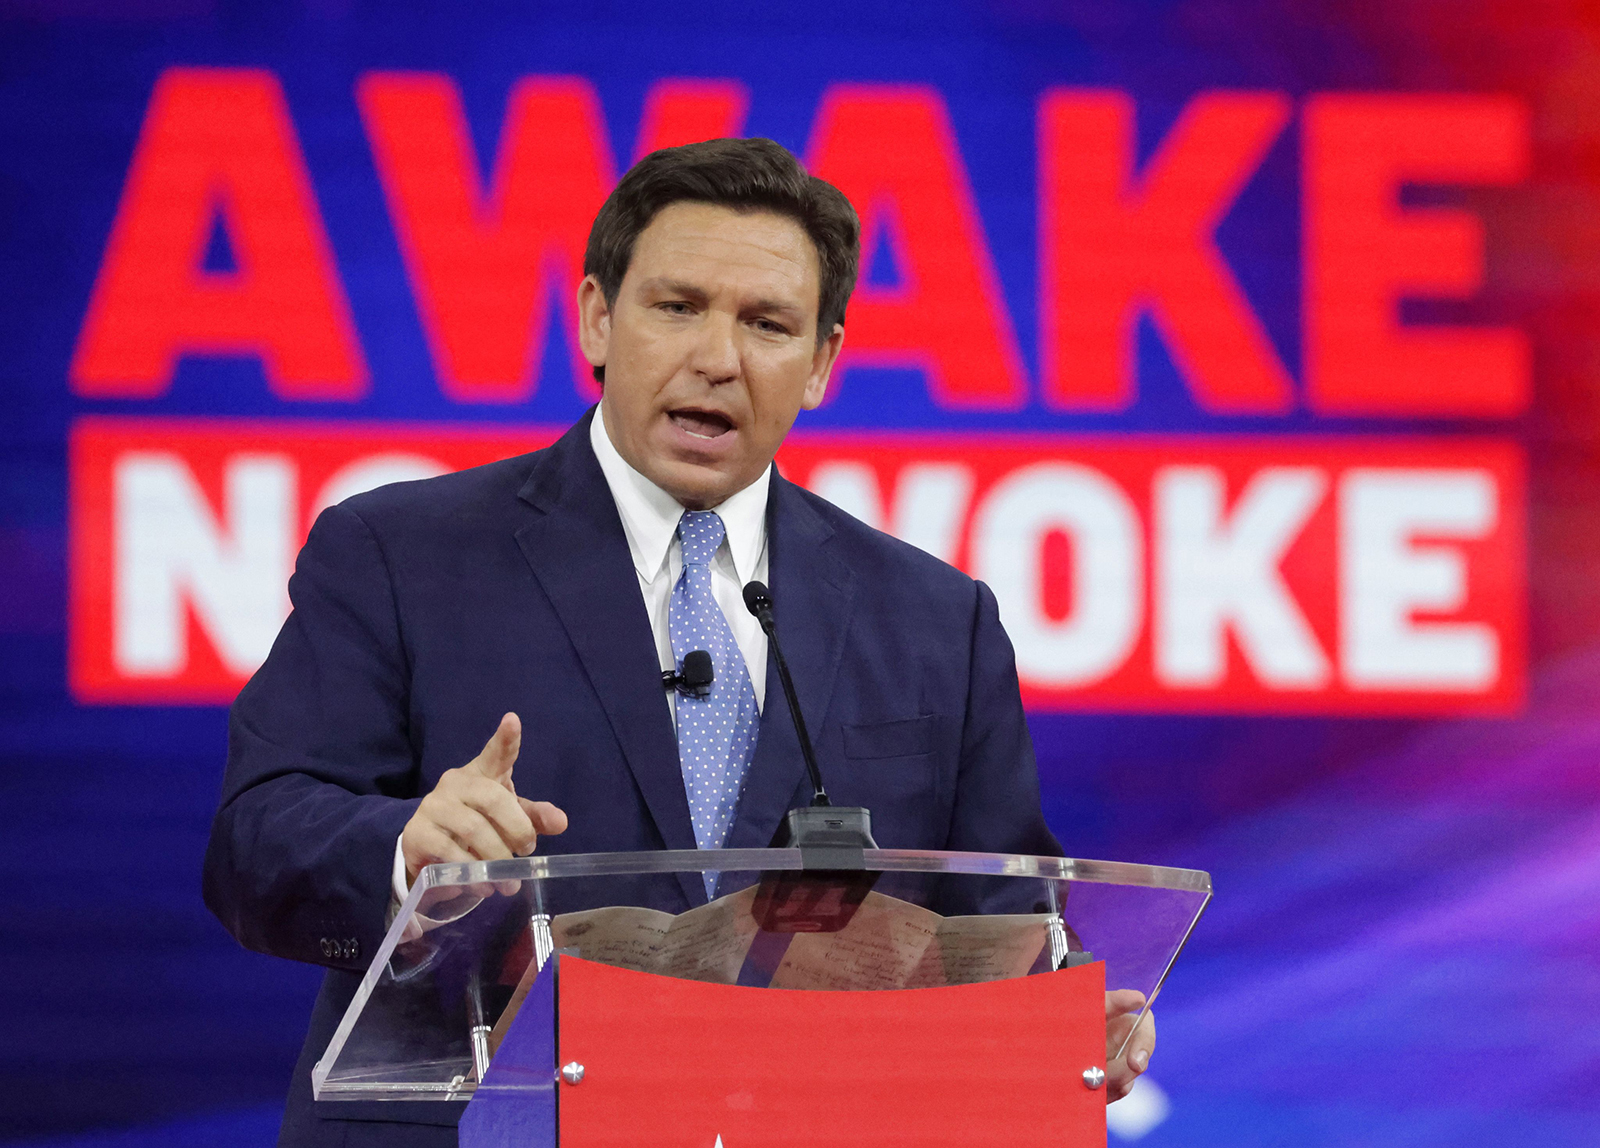 Florida Gov. Ron DeSantis delivers remarks at the 2022 CPAC conference in Orlando, Fla., on Feb. 24, 2022.